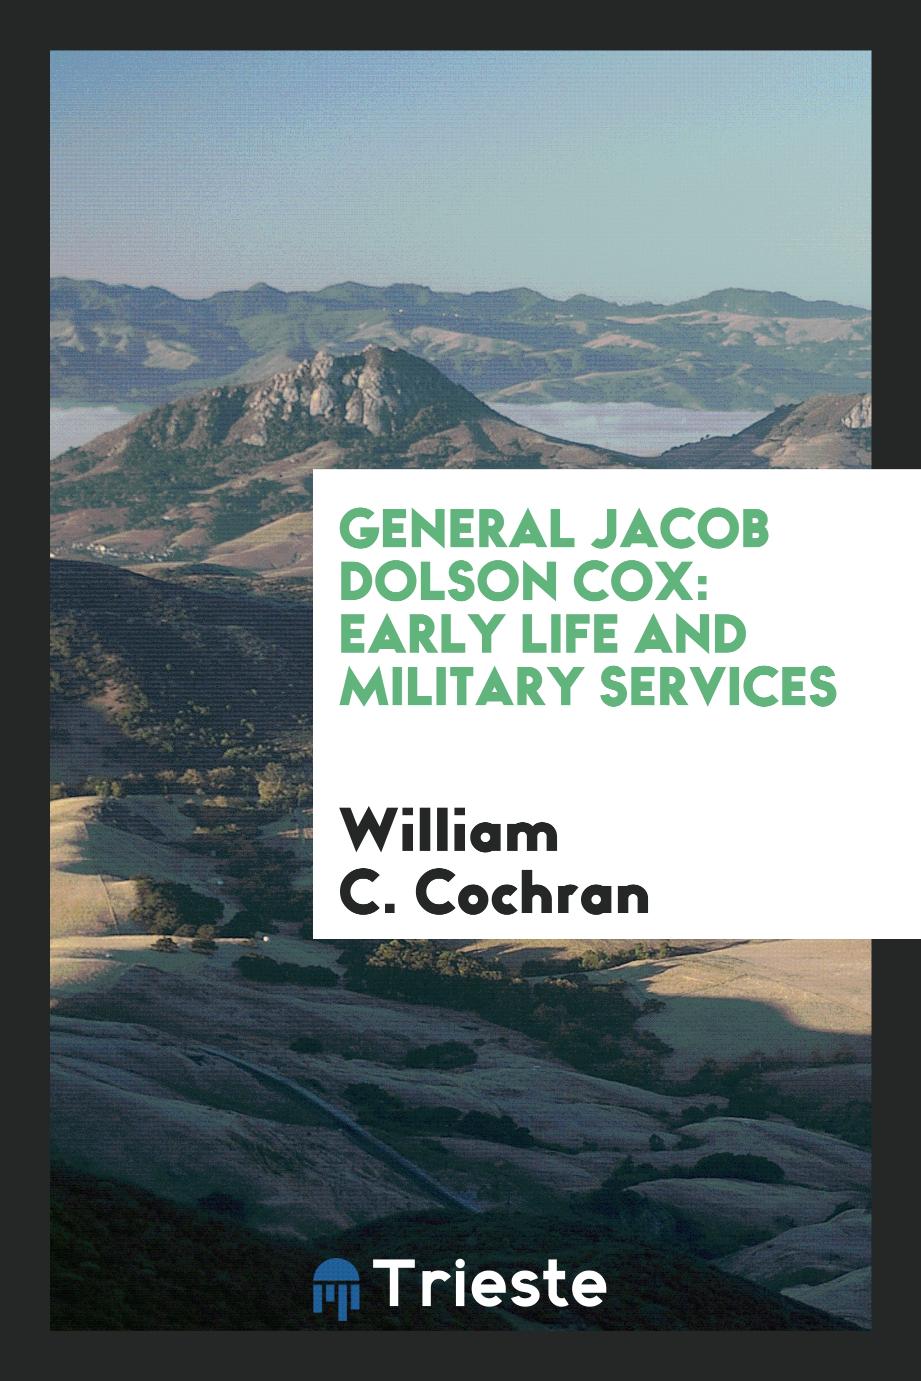 General Jacob Dolson Cox: Early Life and Military Services